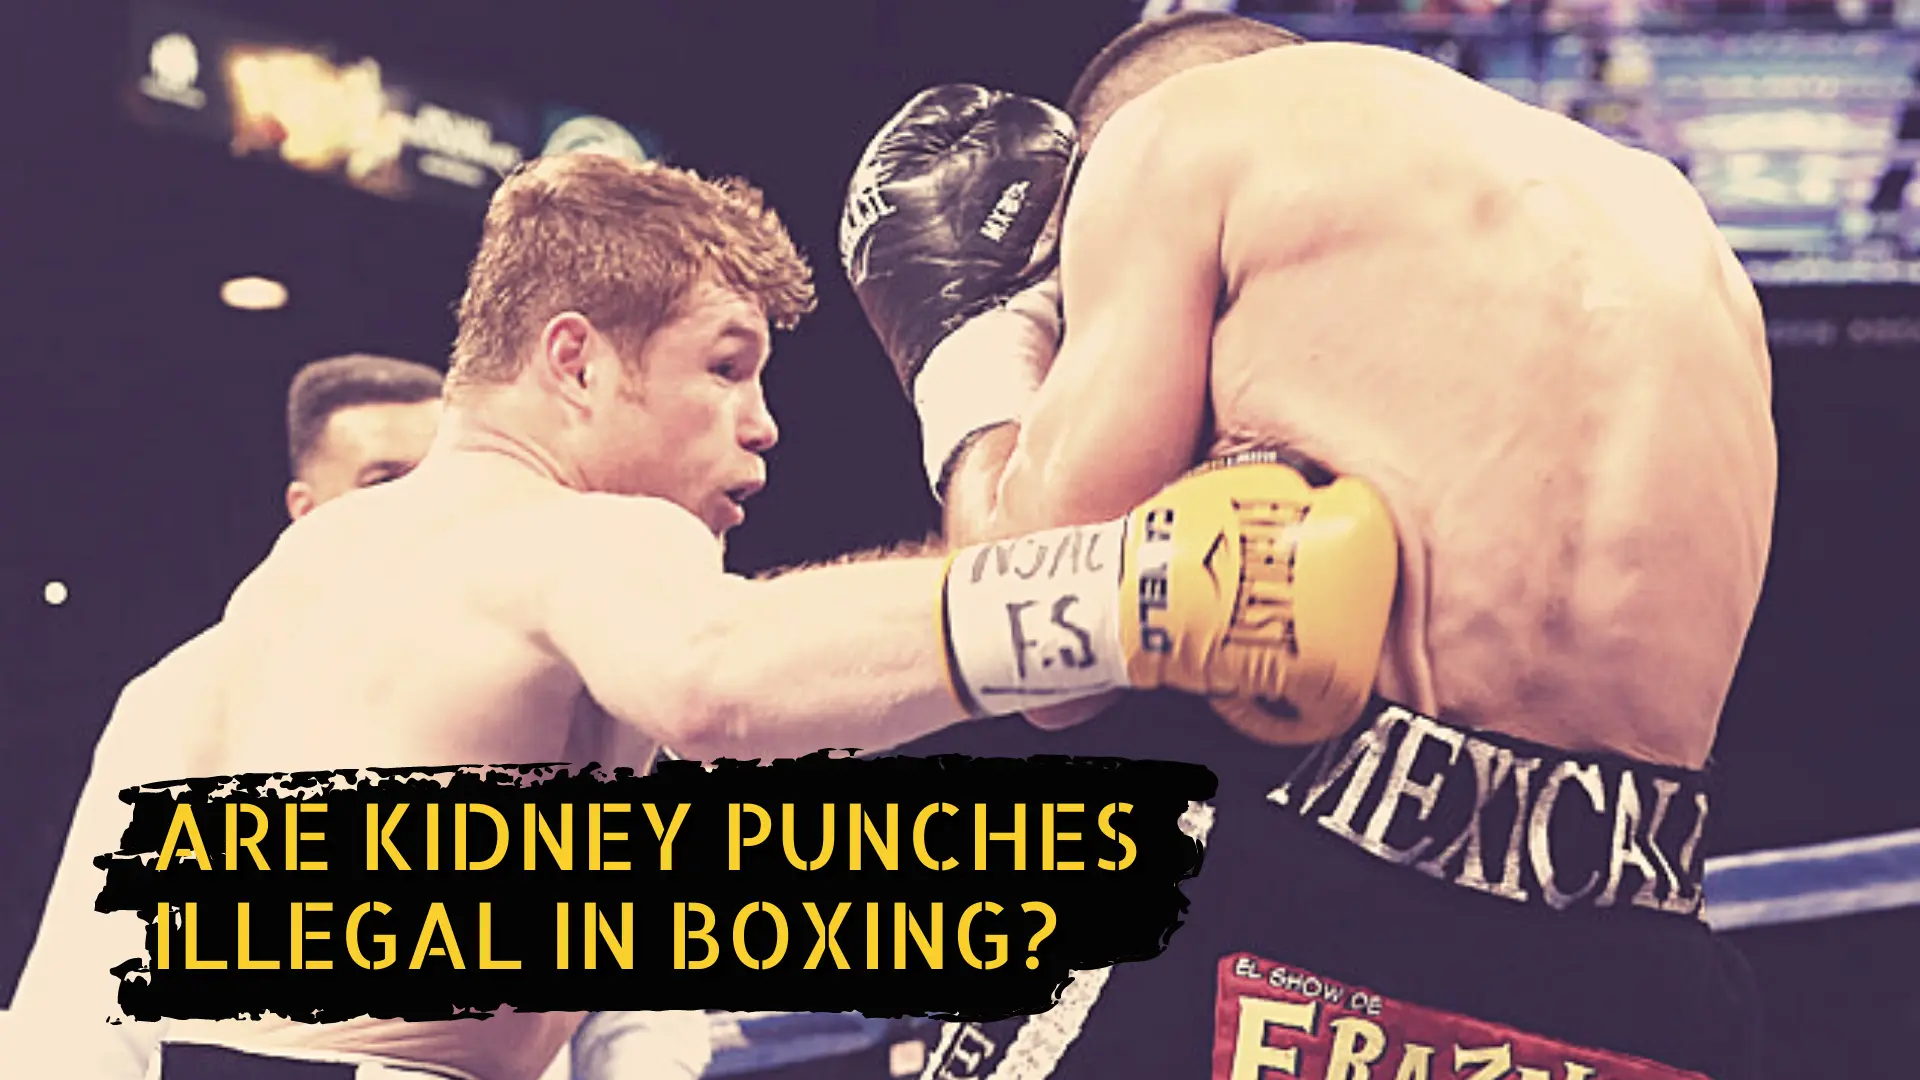 A kidney punch in boxing